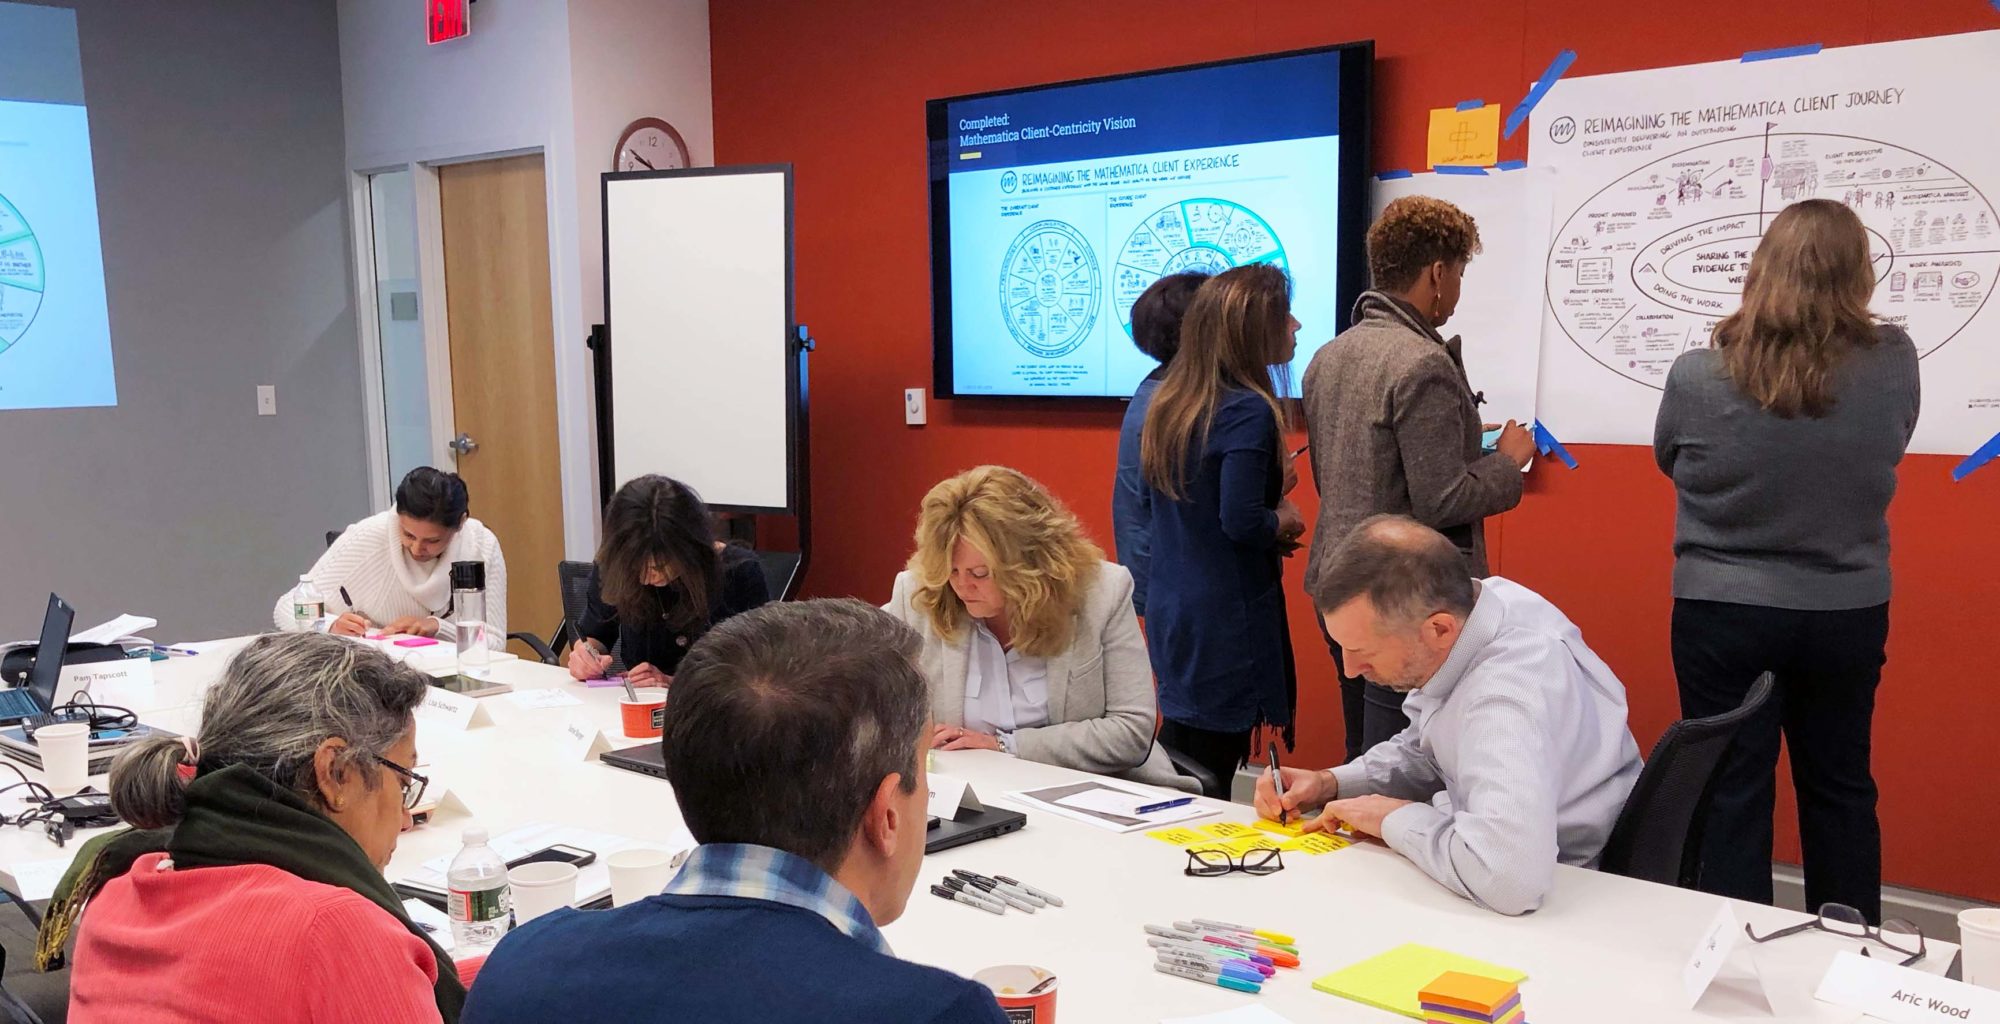 Four people stand in front of an oversized piece of paper with a map sketched on it. Several other people sit around a conference table writing on sticky notes.